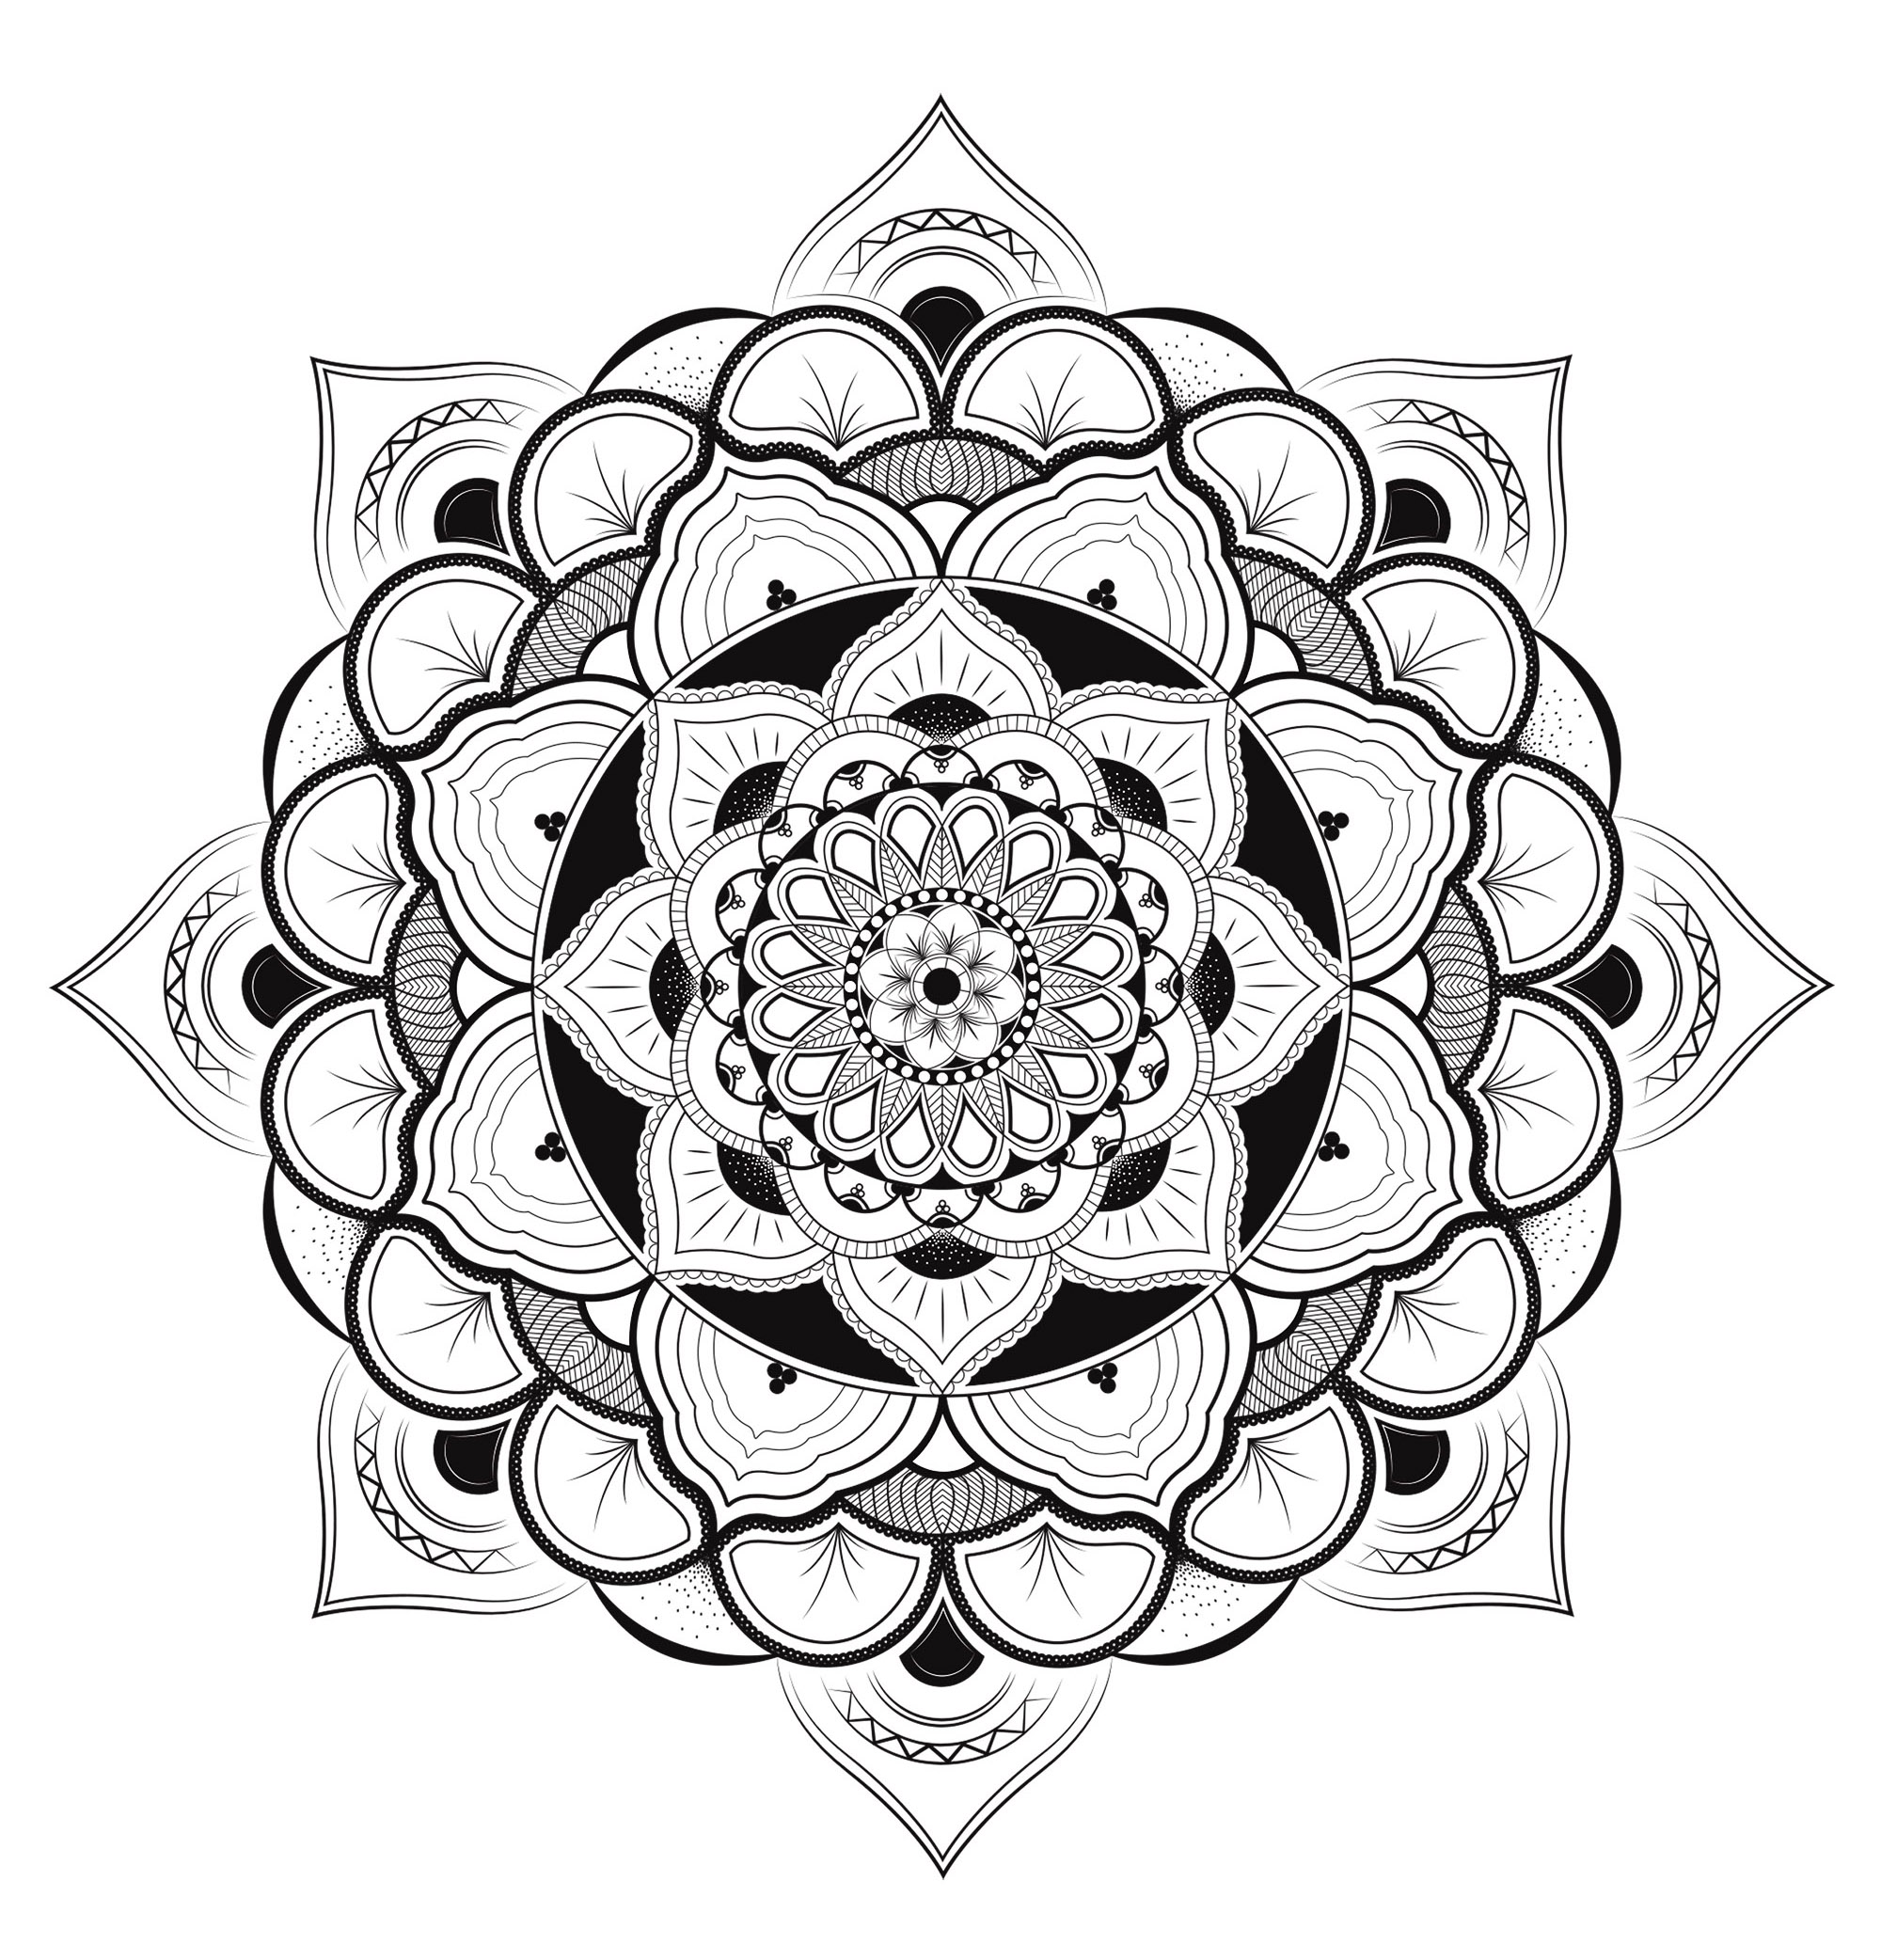 A Mandala for the experts, created by Louise ! Large number of little areas, very fine features, a coloring sheet just waiting for colors chosen with artistic sense ... Chose your pencils & pens.